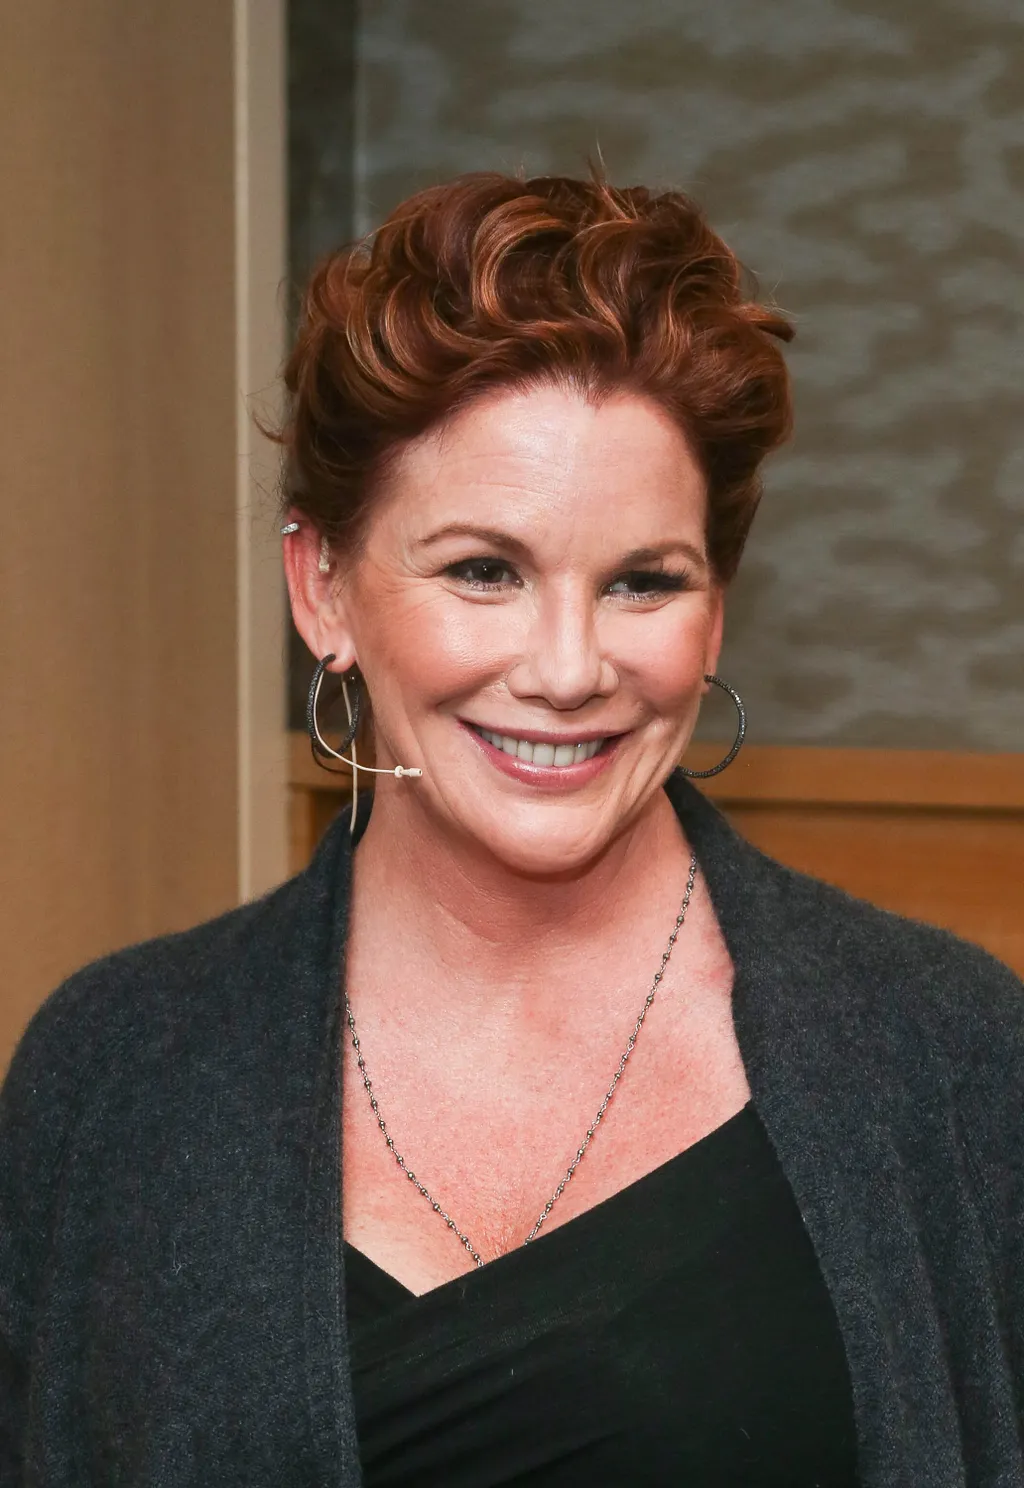 Melissa Gilbert Signs Copies Of Her Children's Book "Daisy And Josephine" GettyImageRank2 Lexington VERTICAL USA New York City LITERATURE VISIT Melissa Gilbert Arts Culture and Entertainment Celebrities Barnes & Noble 